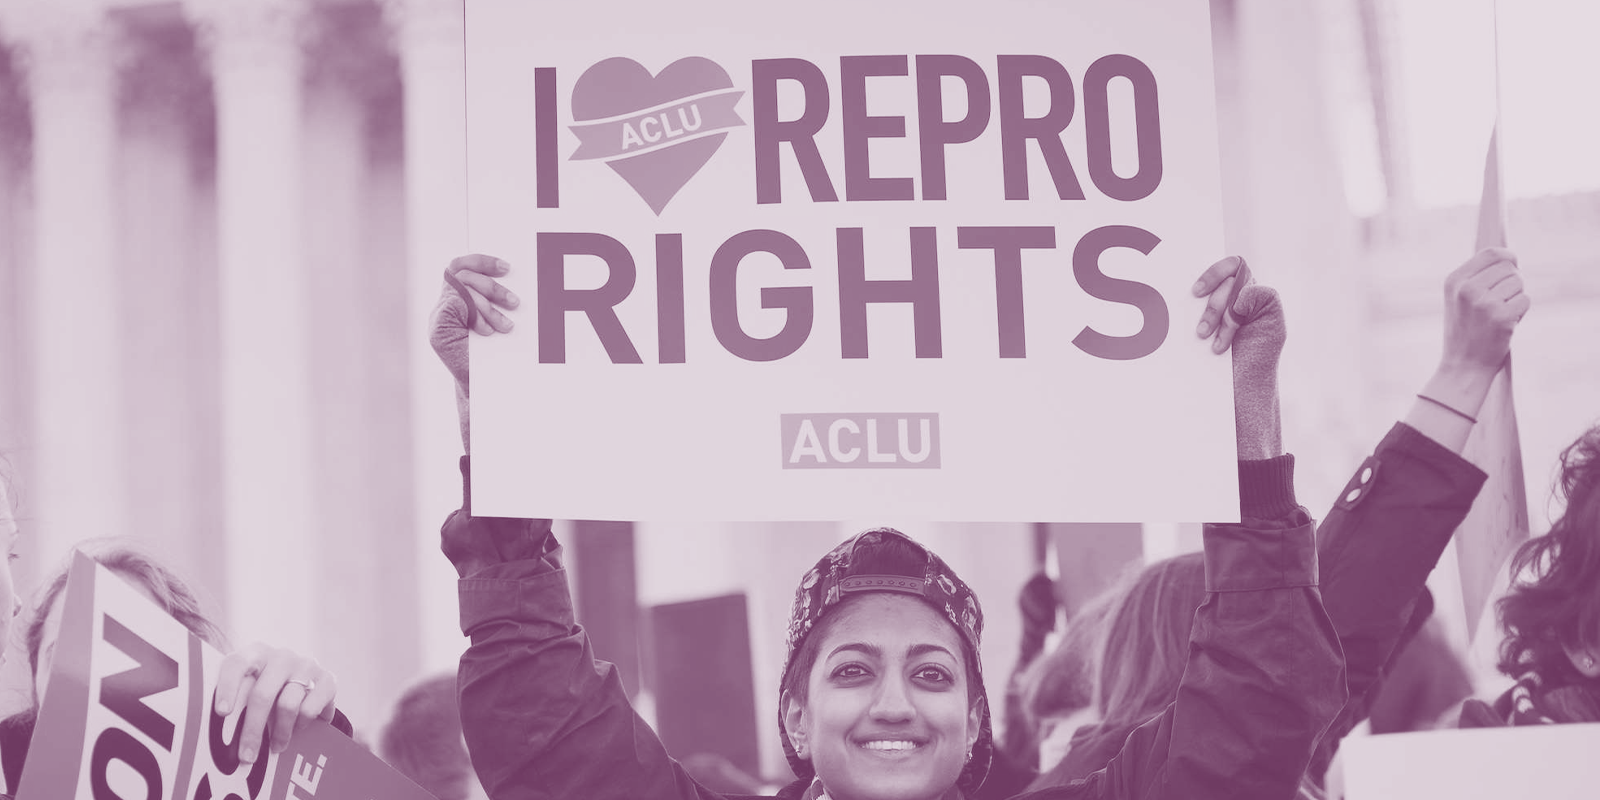 Image of a person holding a protest sign that reads, "I love repro rights."